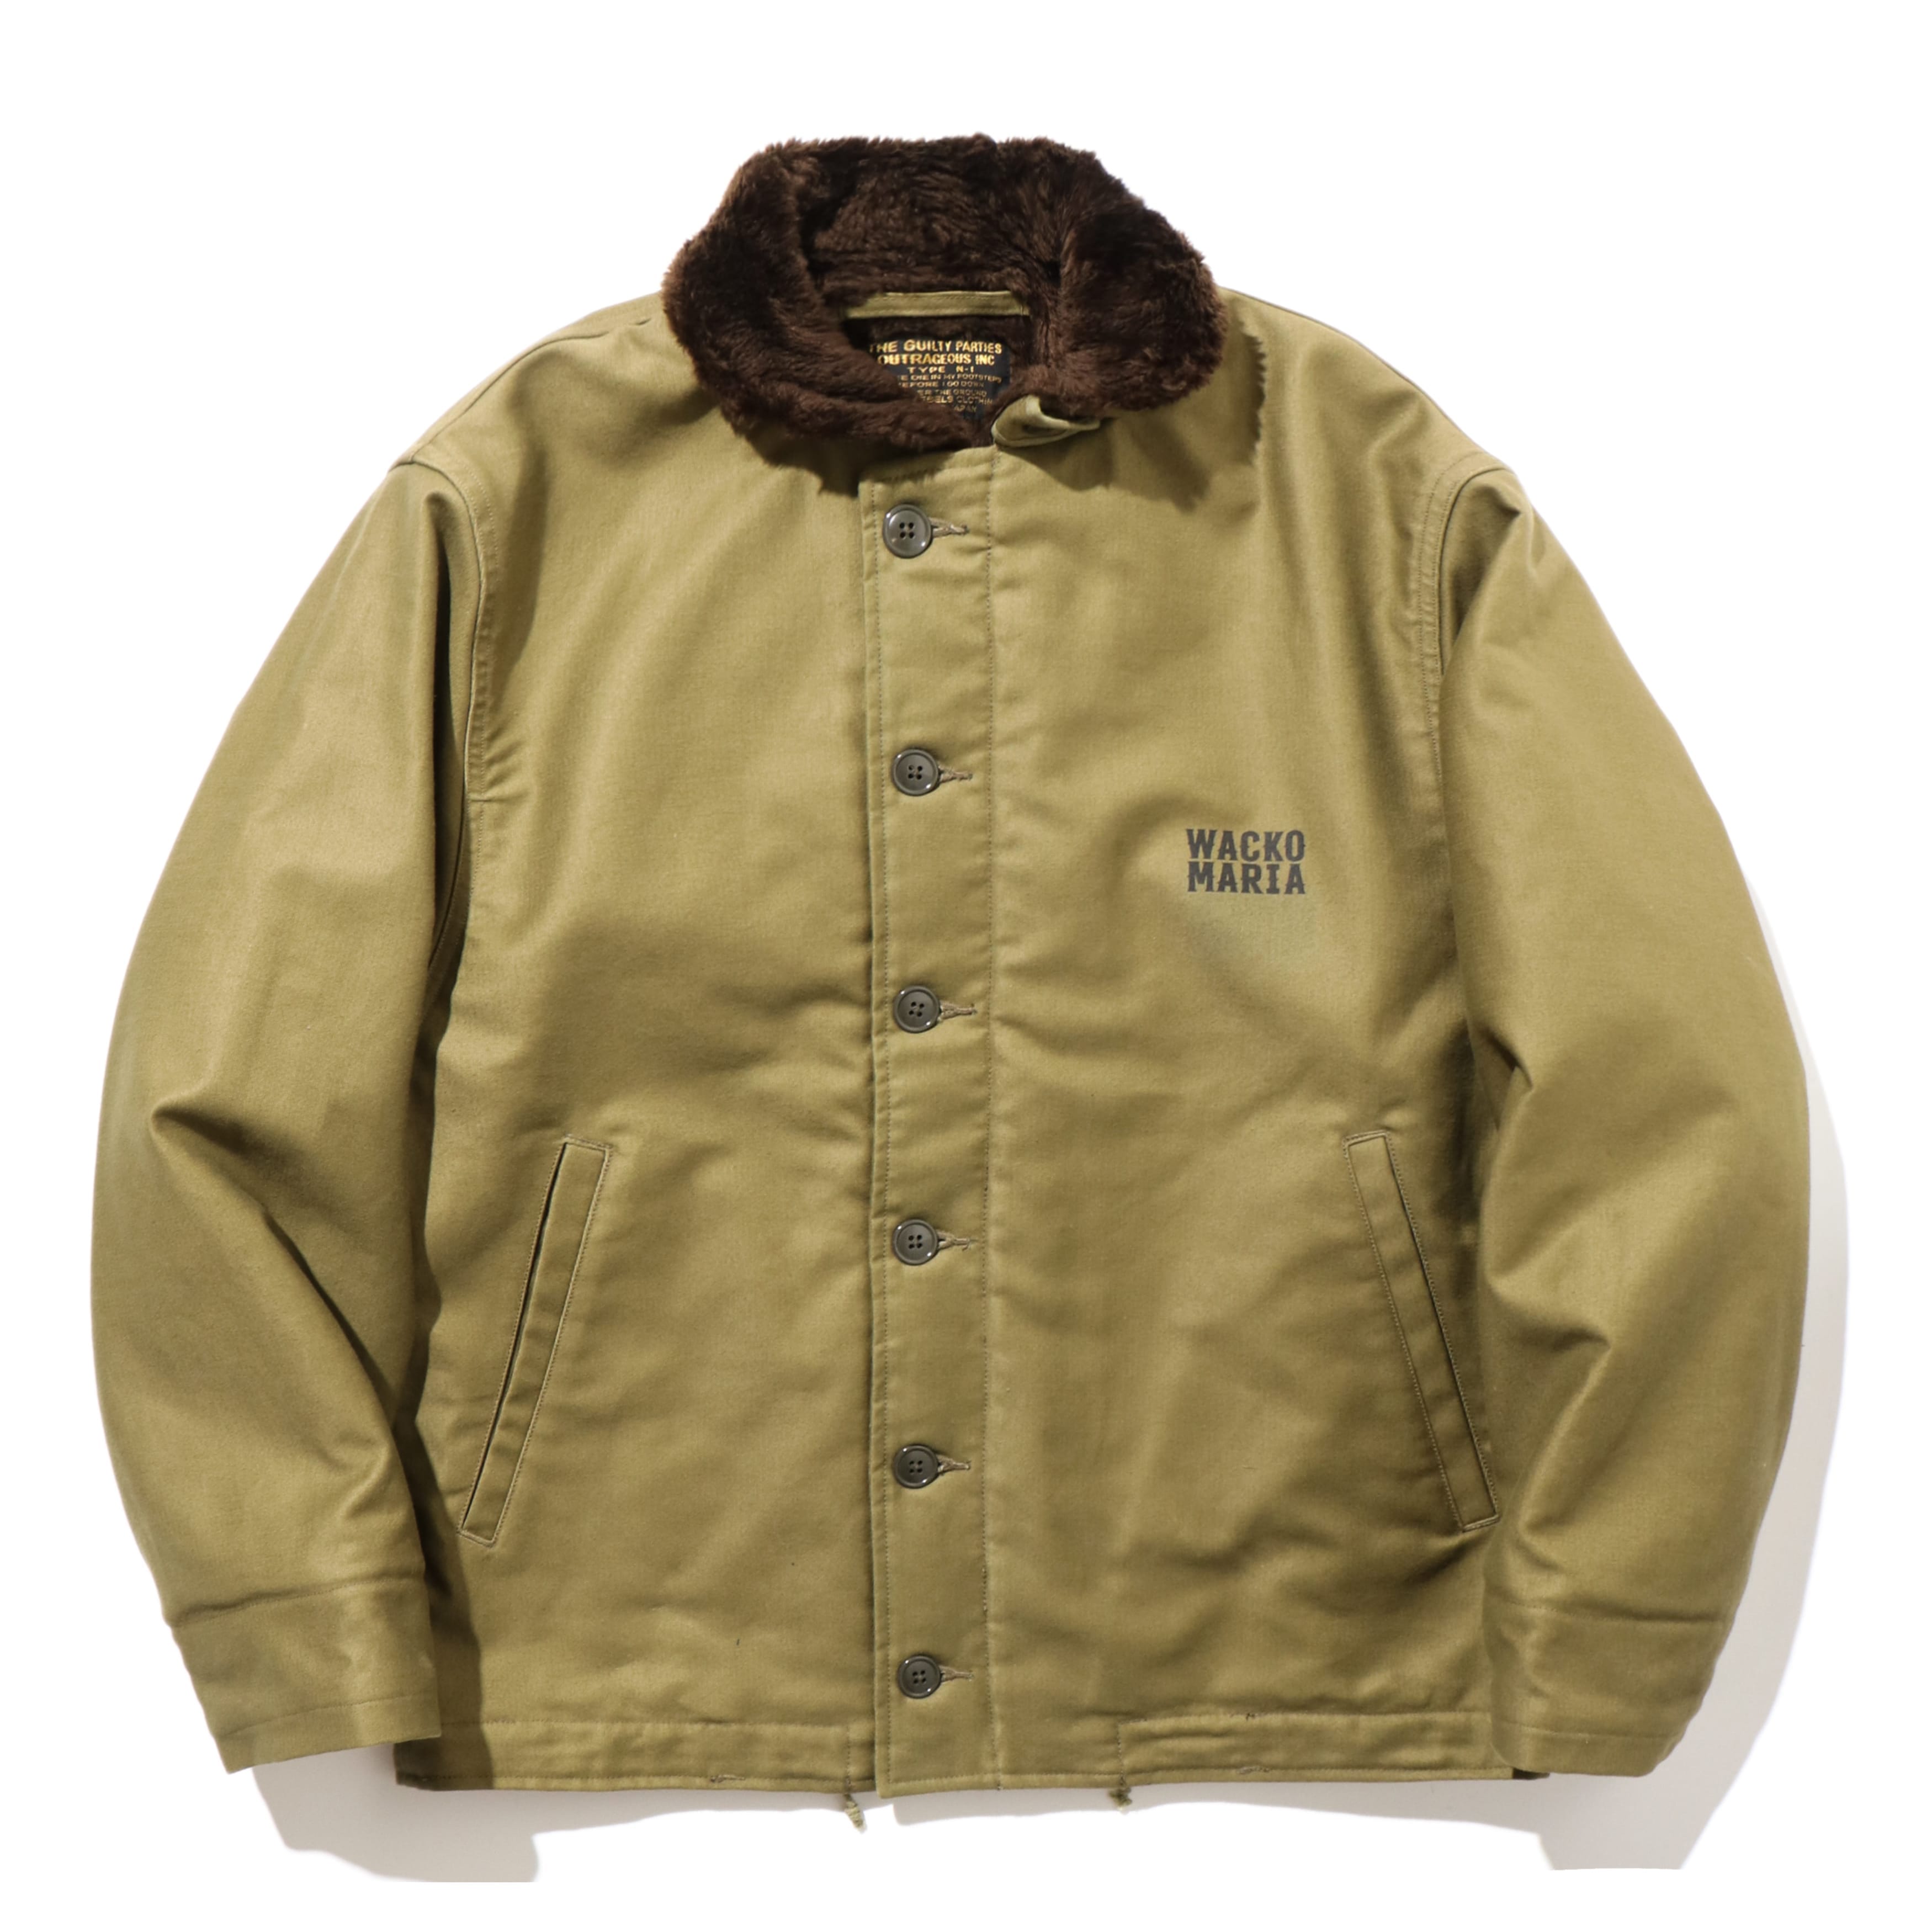 N-1 DECK JACKET-A- (TYPE-2) – TIME AFTER TIME